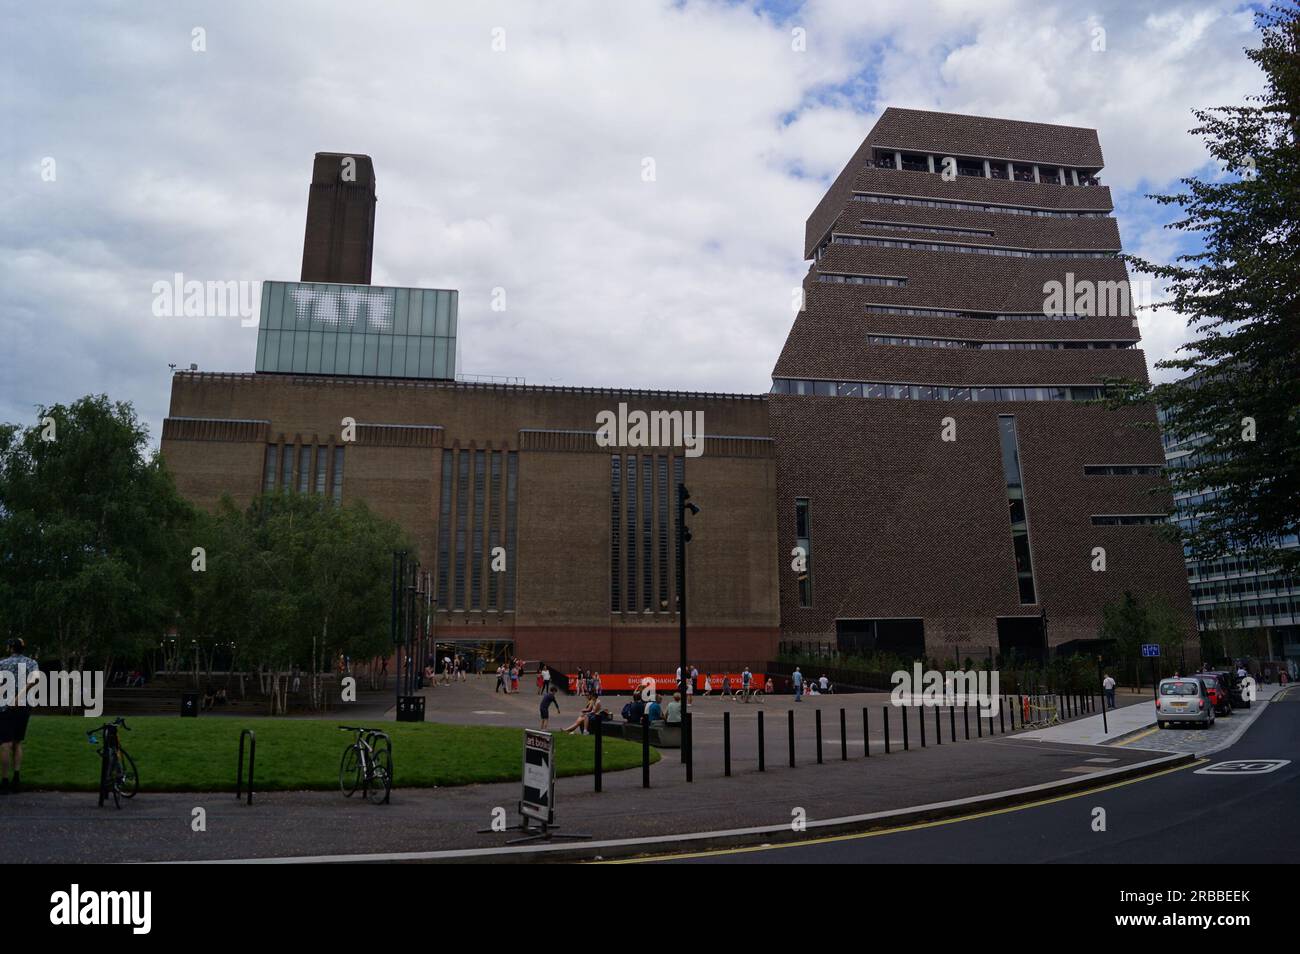 London, UK: a view of Tate Modern Gallery and the new Len Blavatnik building in Bankside Stock Photo